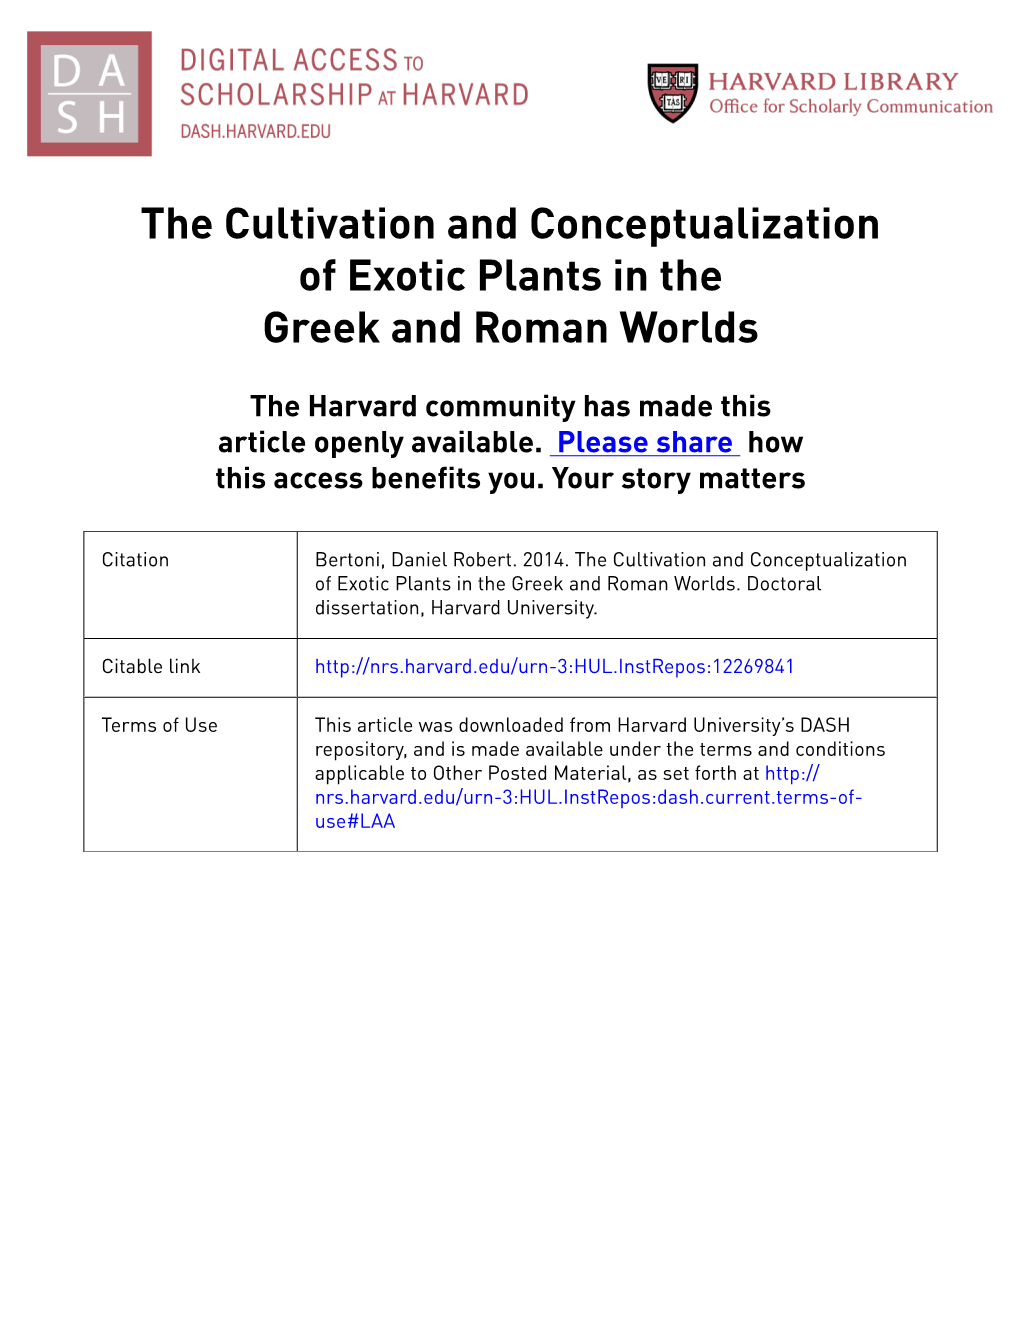 The Cultivation and Conceptualization of Exotic Plants in the Greek and Roman Worlds